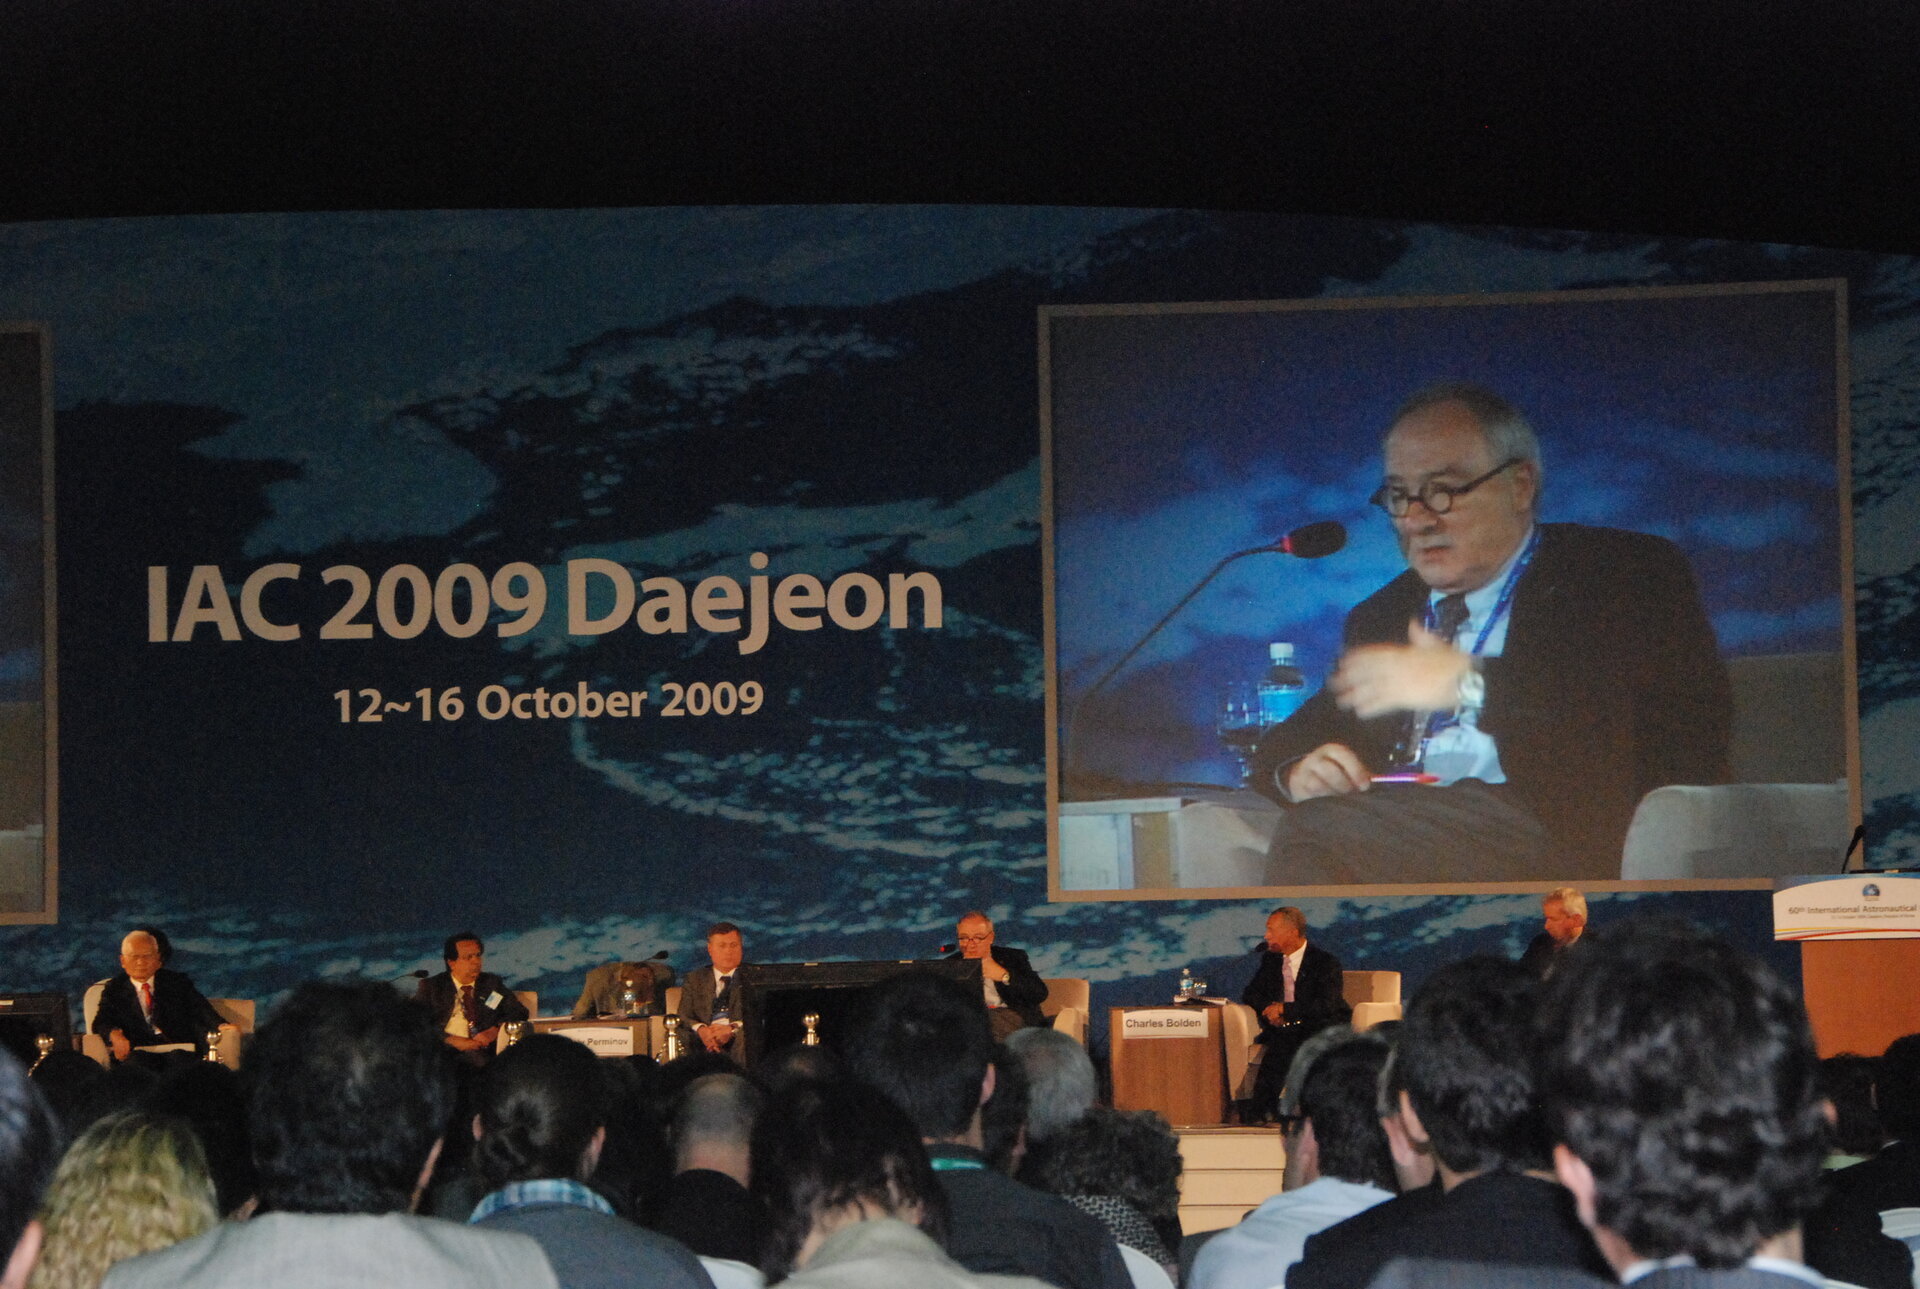 ESA Director General Jean-Jacques Dordain addressing the audience at the Heads of Agencies Plenary Session during the IAC 2009